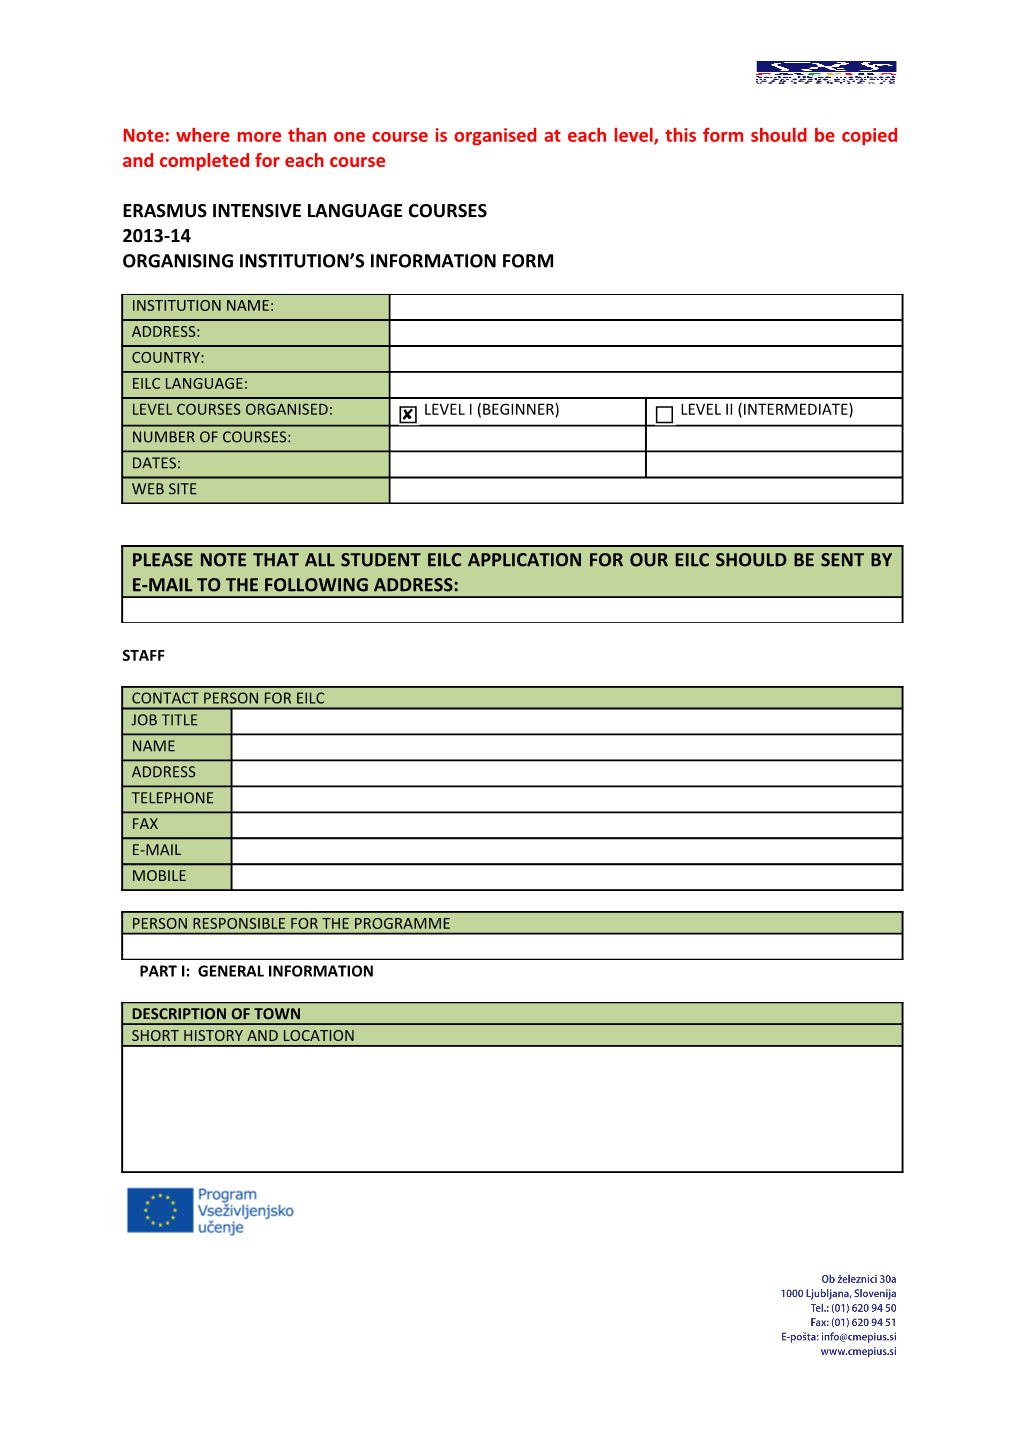 Note: Where More Than One Course Is Organised at Each Level, This Form Should Be Copied s1